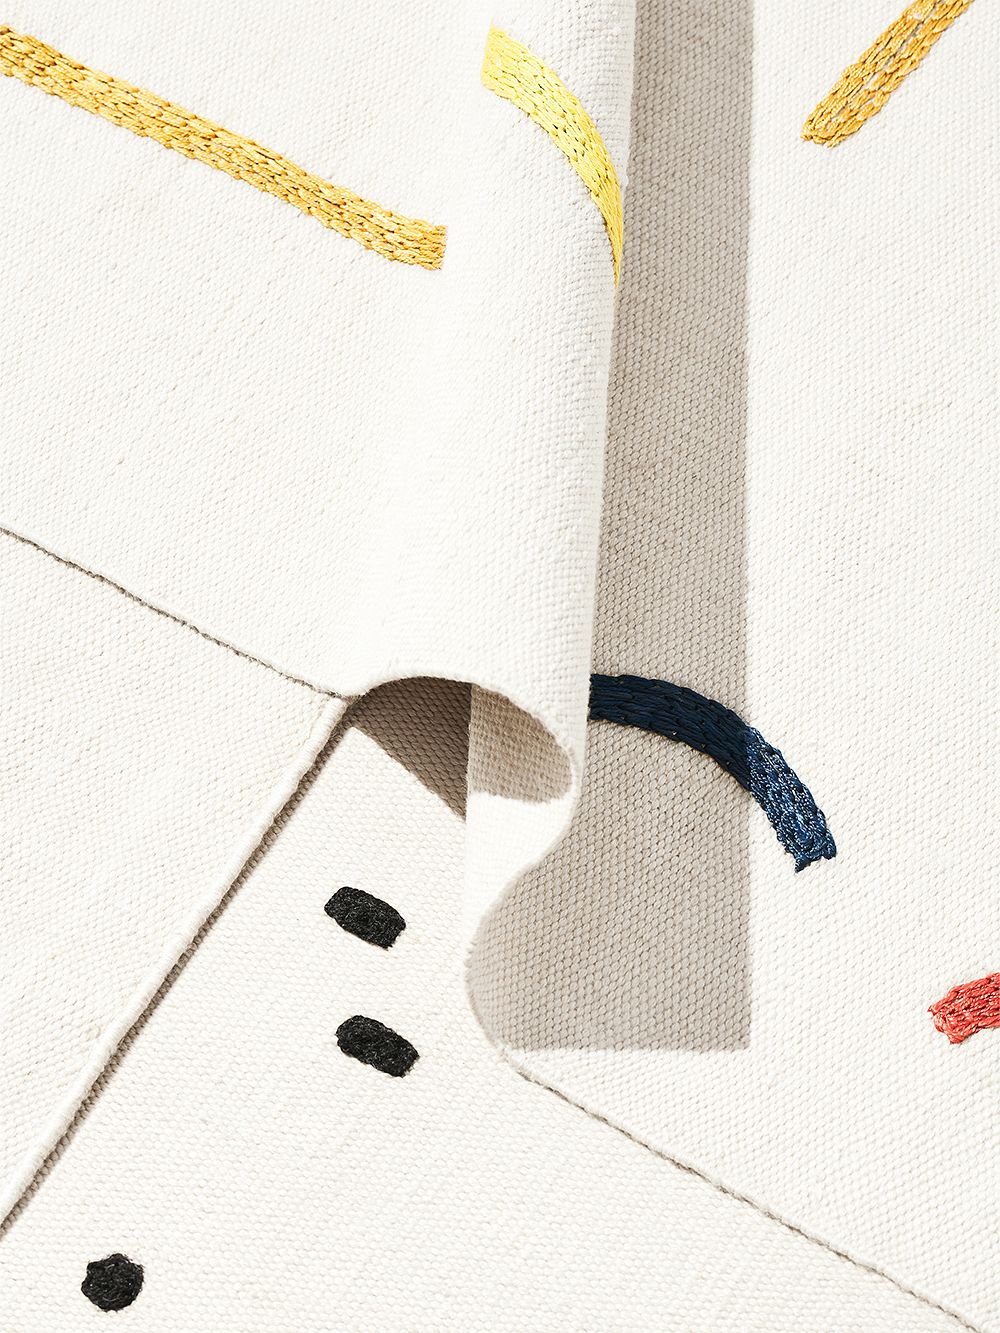 A close up image of several rugs from the Typewriter rug collection by Tomi Leppänen.